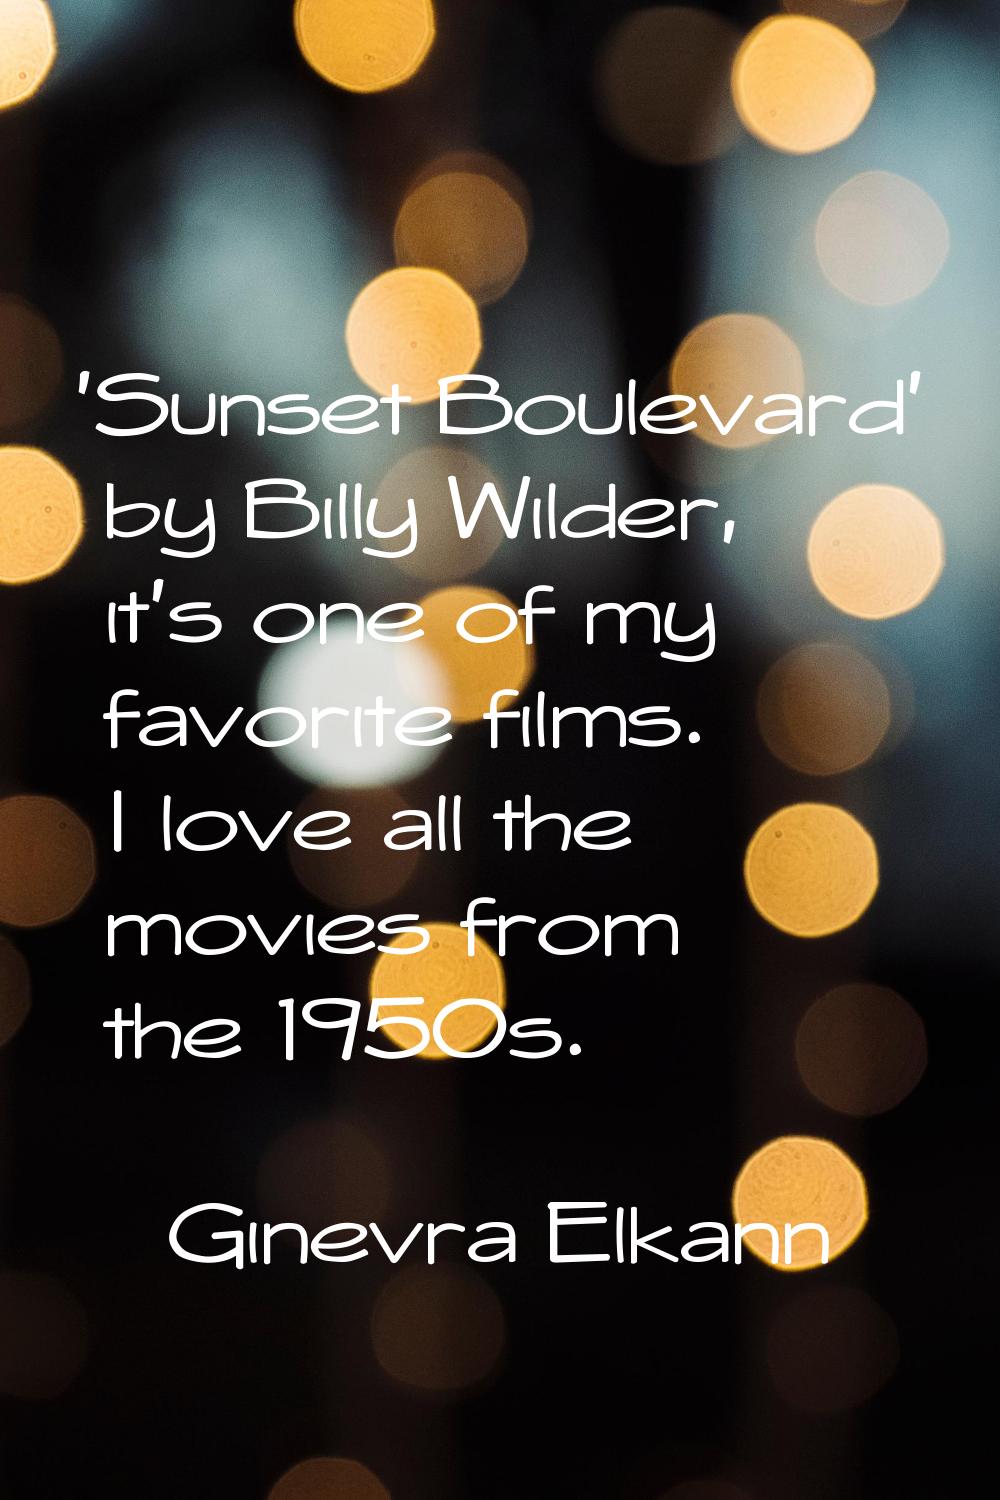 'Sunset Boulevard' by Billy Wilder, it's one of my favorite films. I love all the movies from the 1